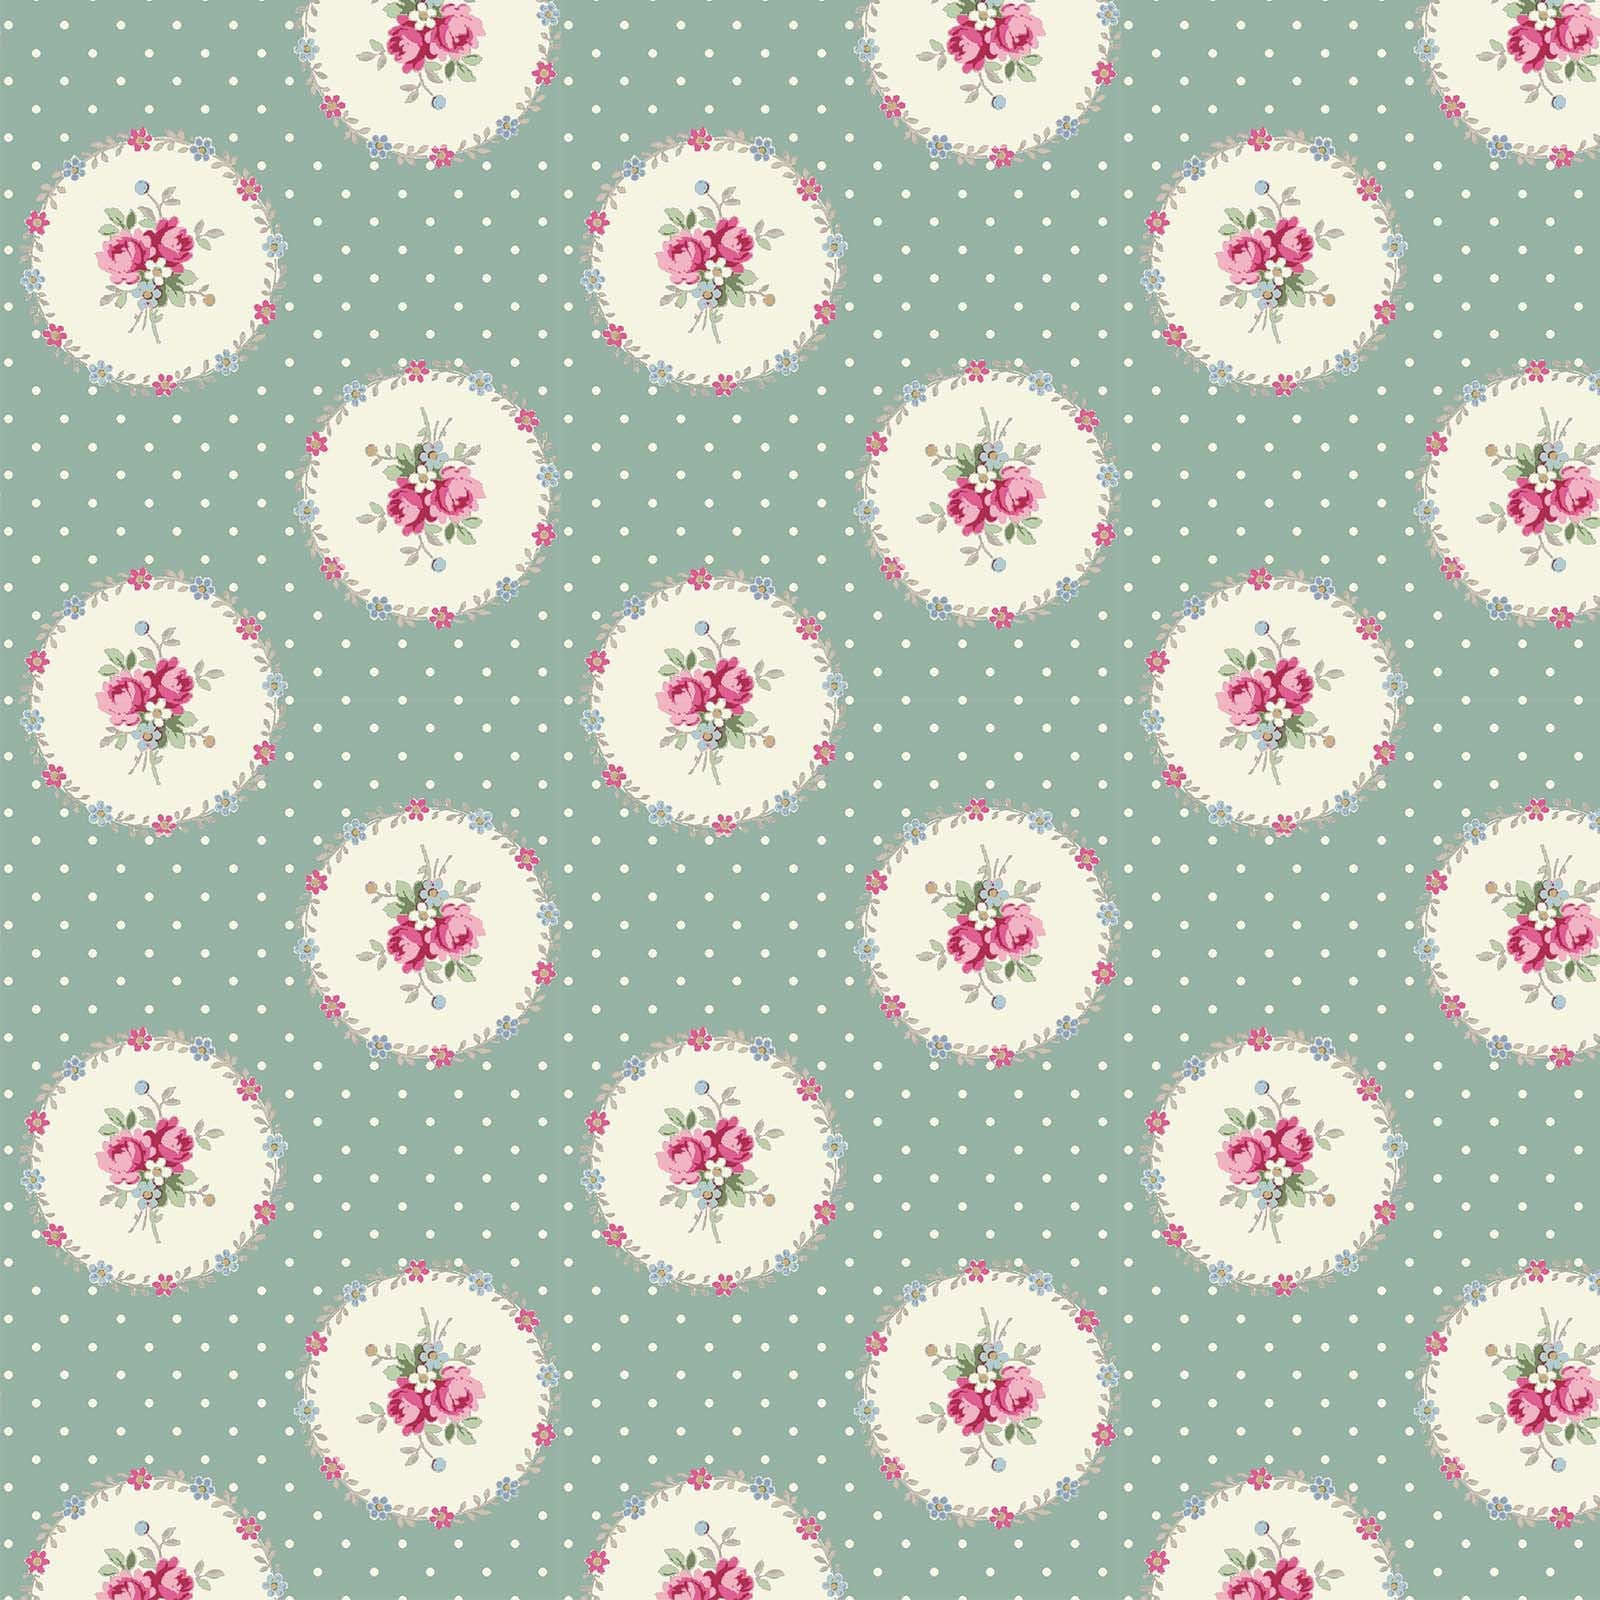 Ruru Rose Bouquet in Paris cotton fabric by Quilt Gate Ru2370-14D Circles of Roses on Green